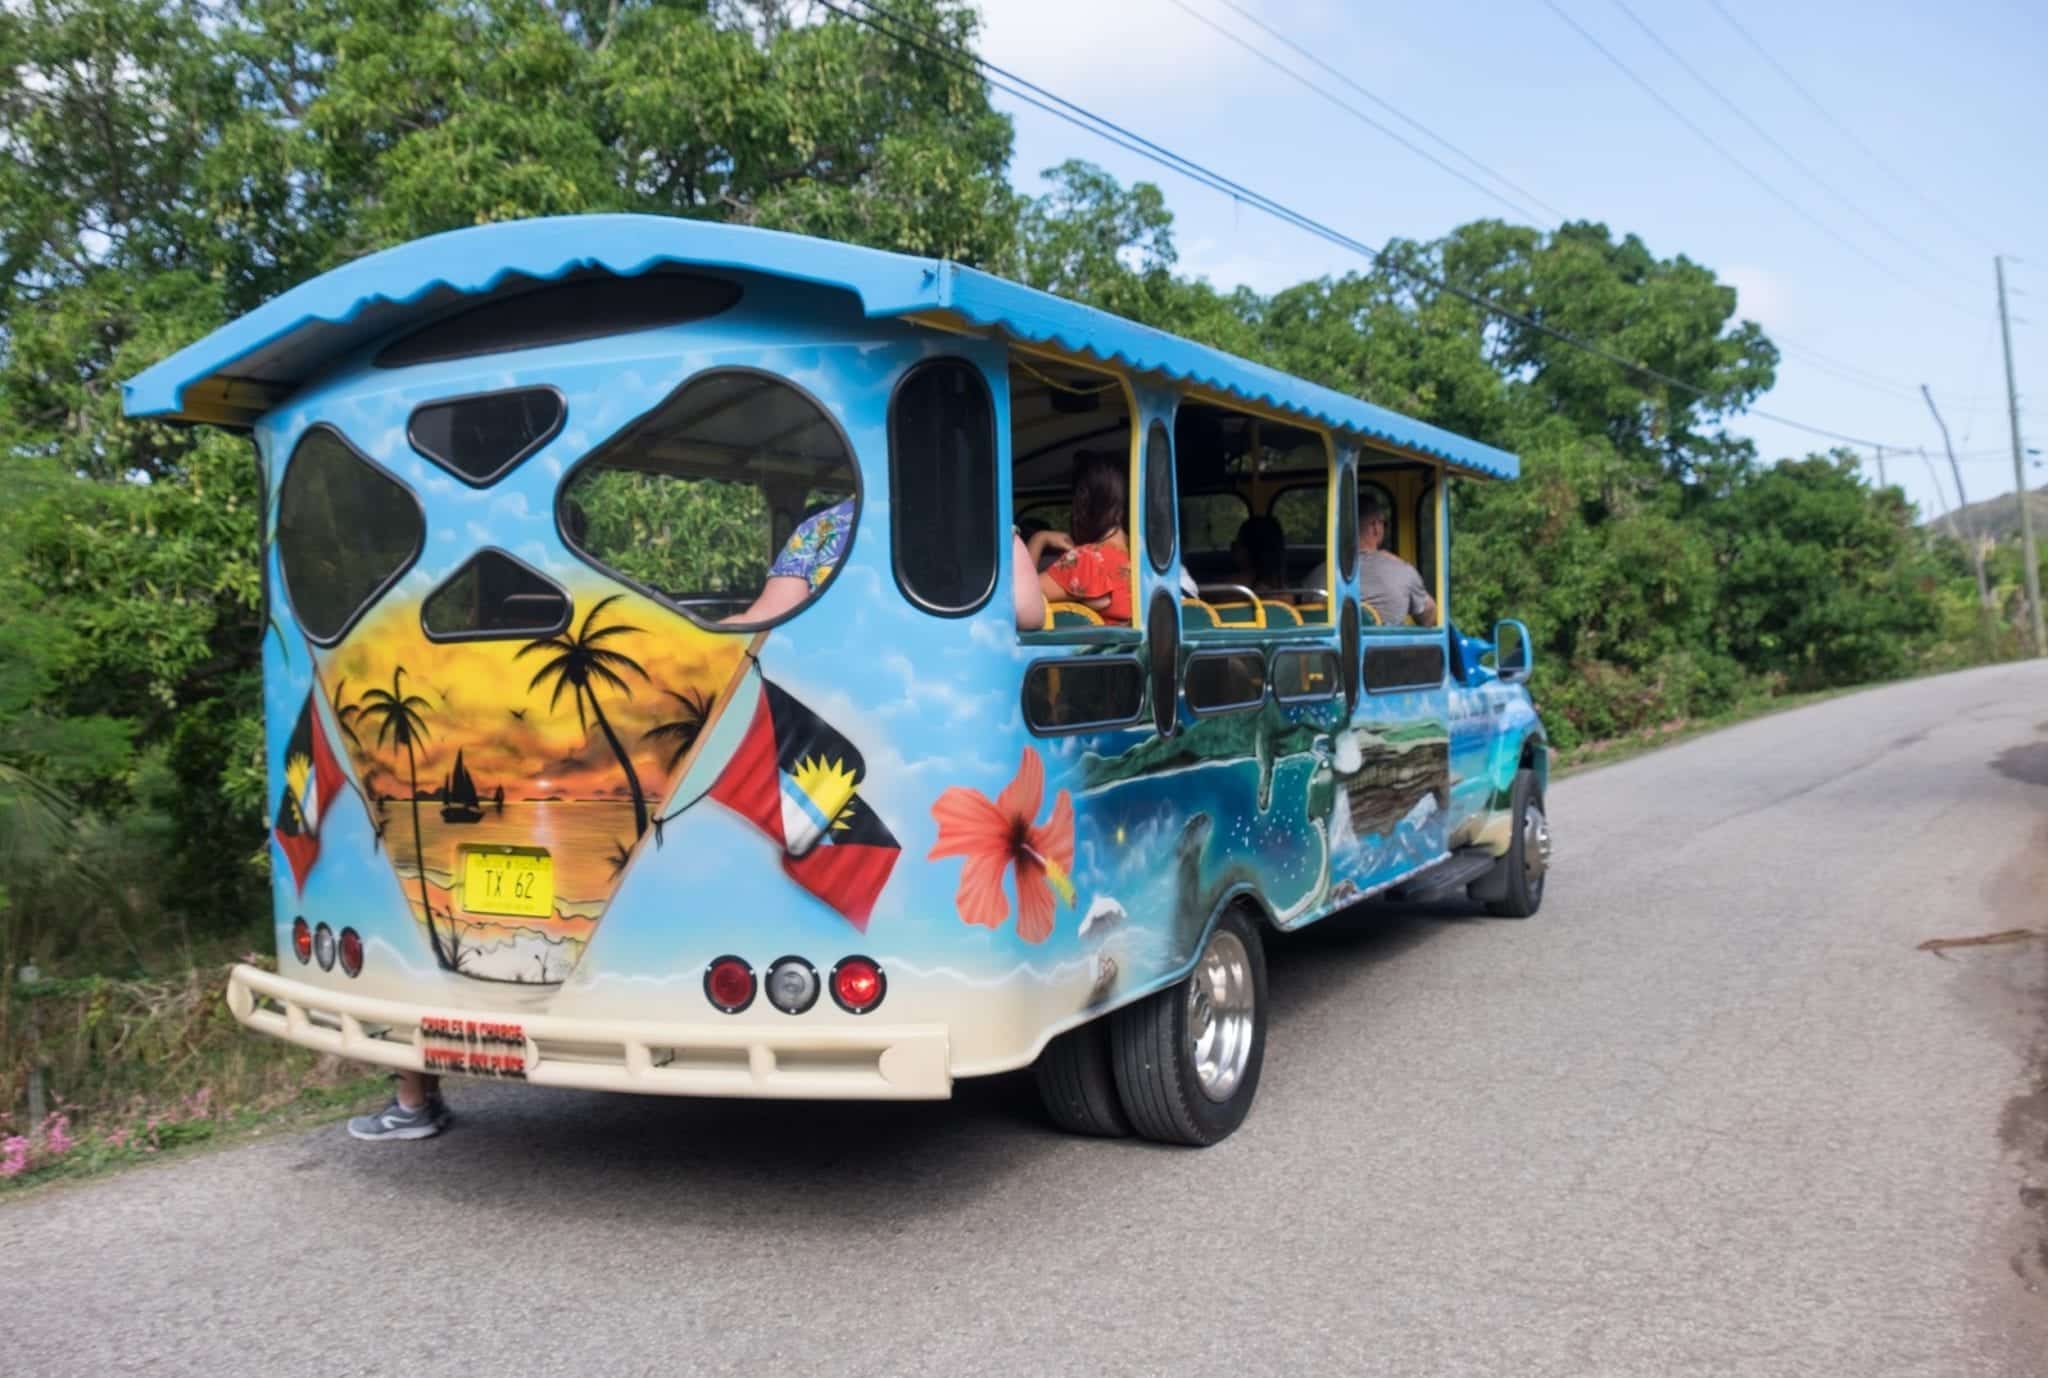 The back of a brightly painted blue bus with orange palm trees painted on the back in Antigua